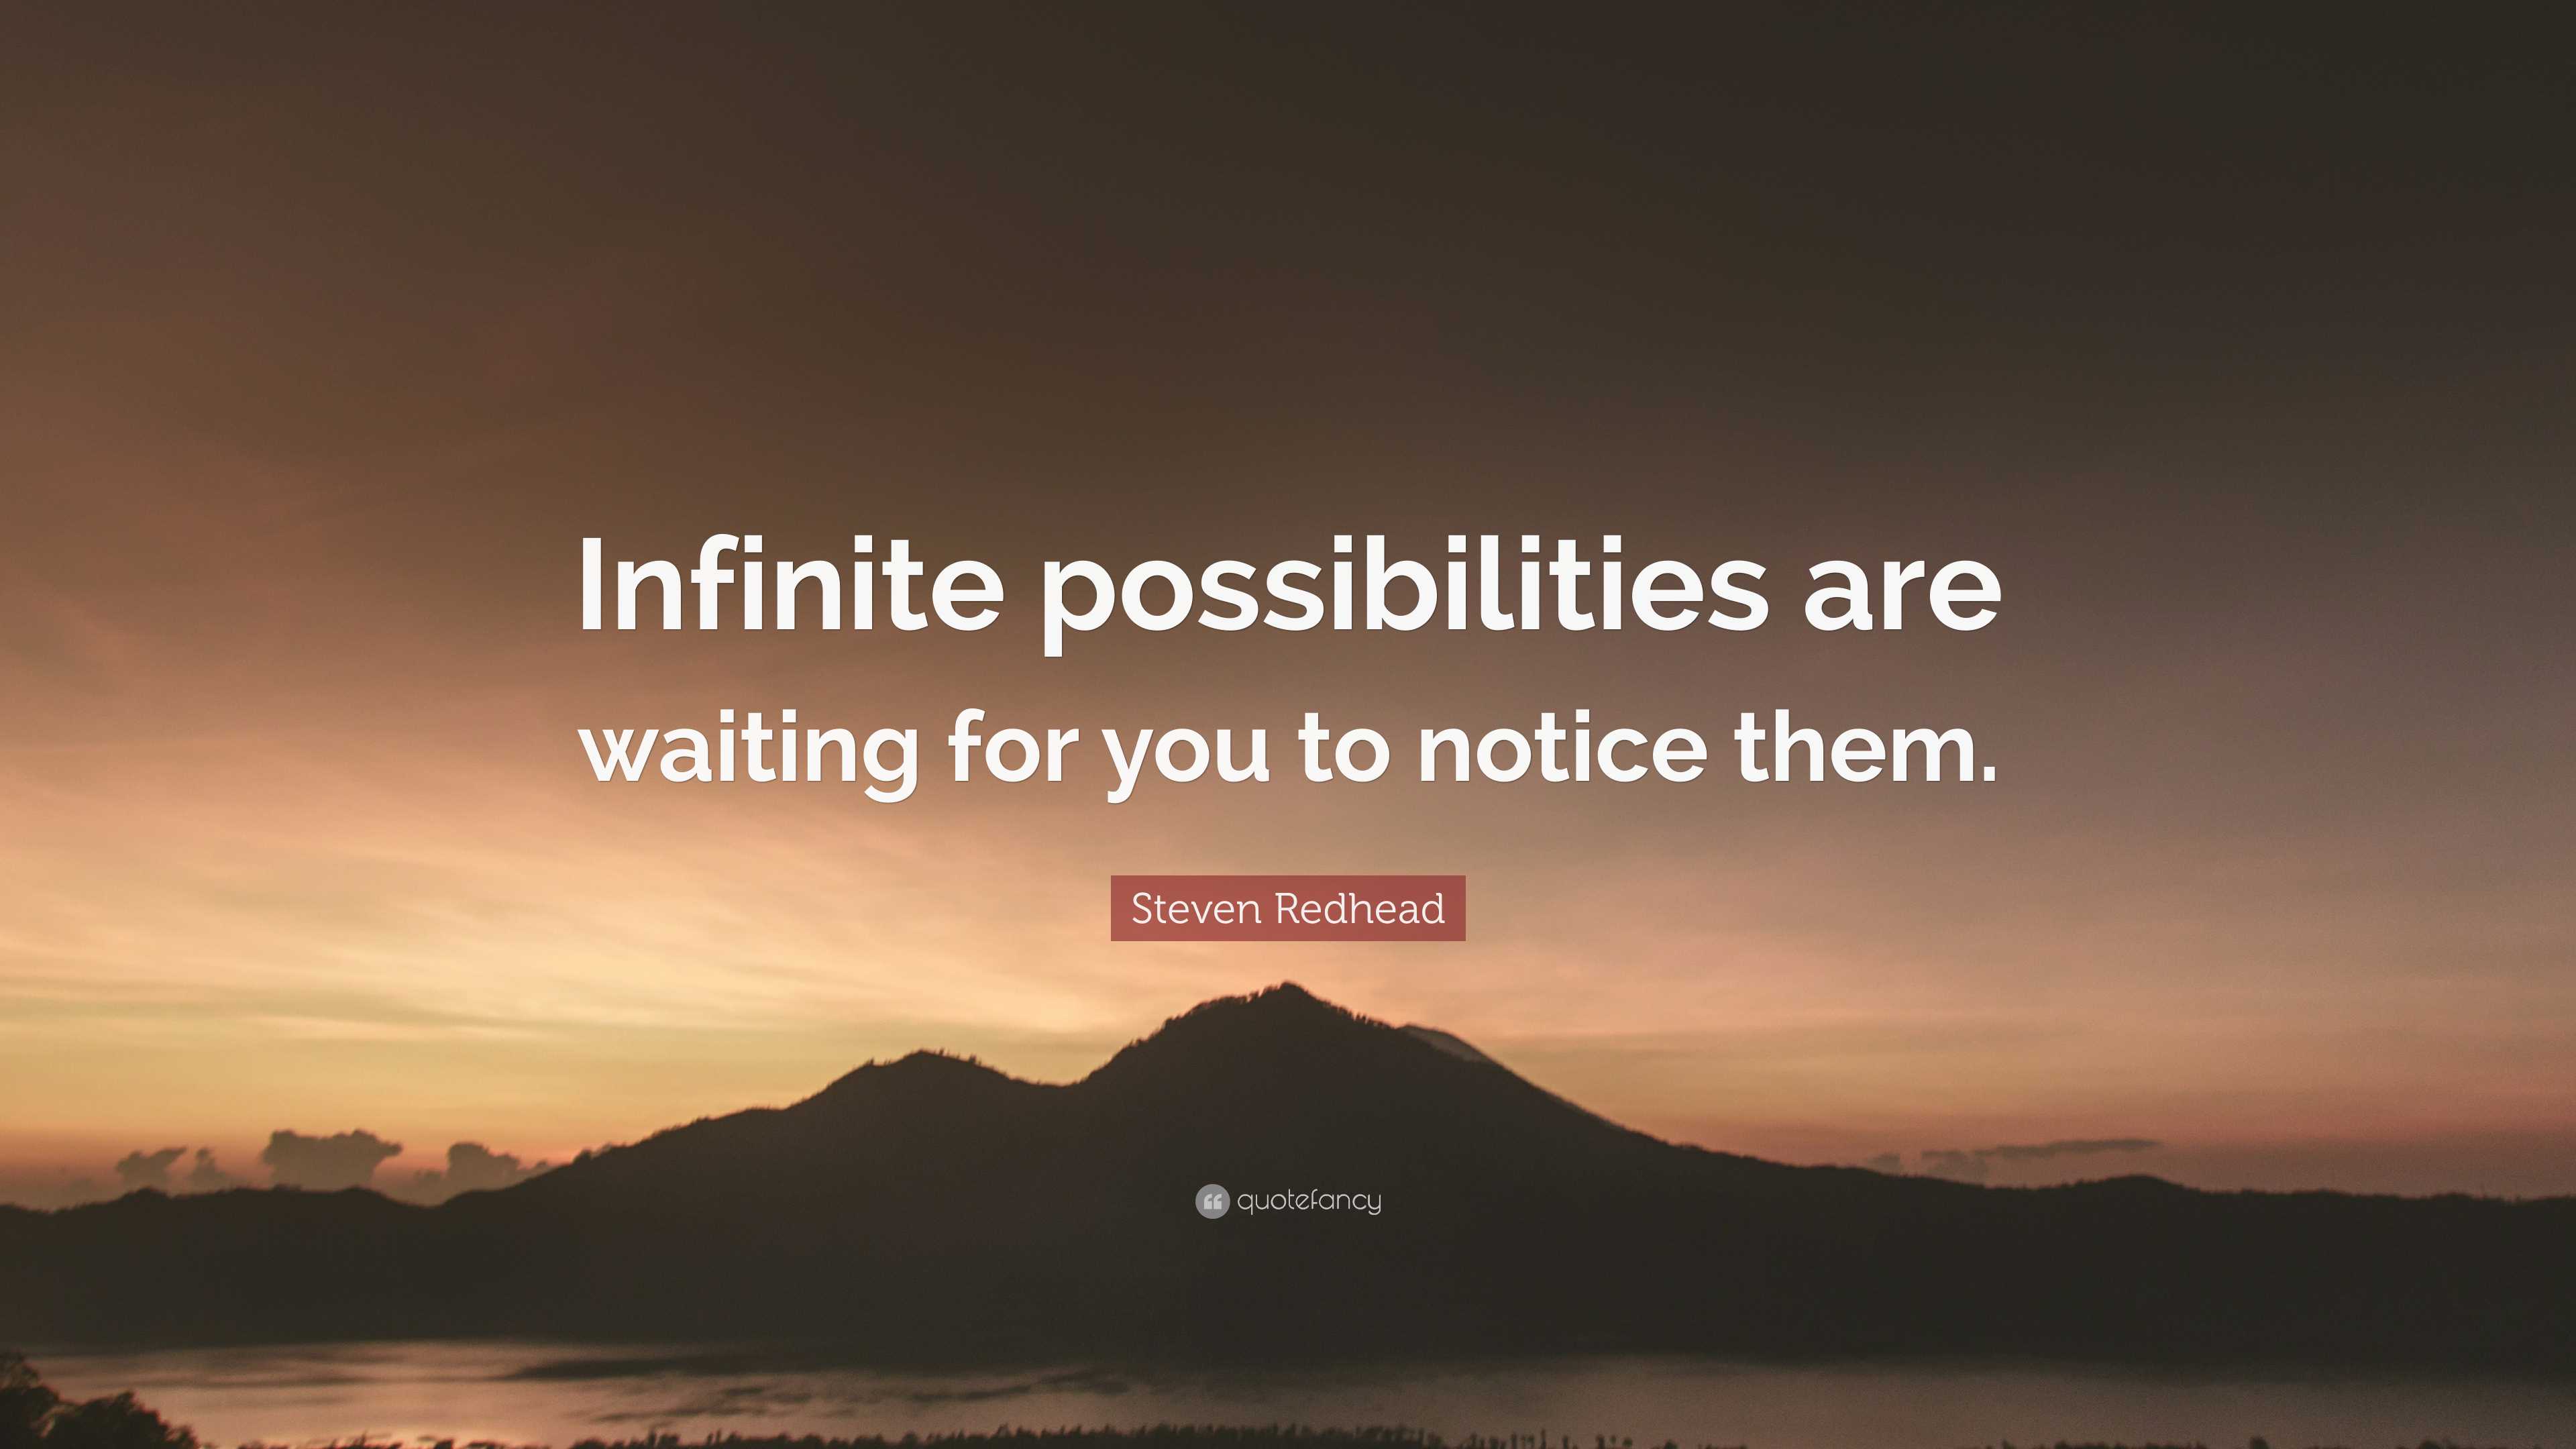 Steven Redhead Quote: “Infinite possibilities are waiting for you